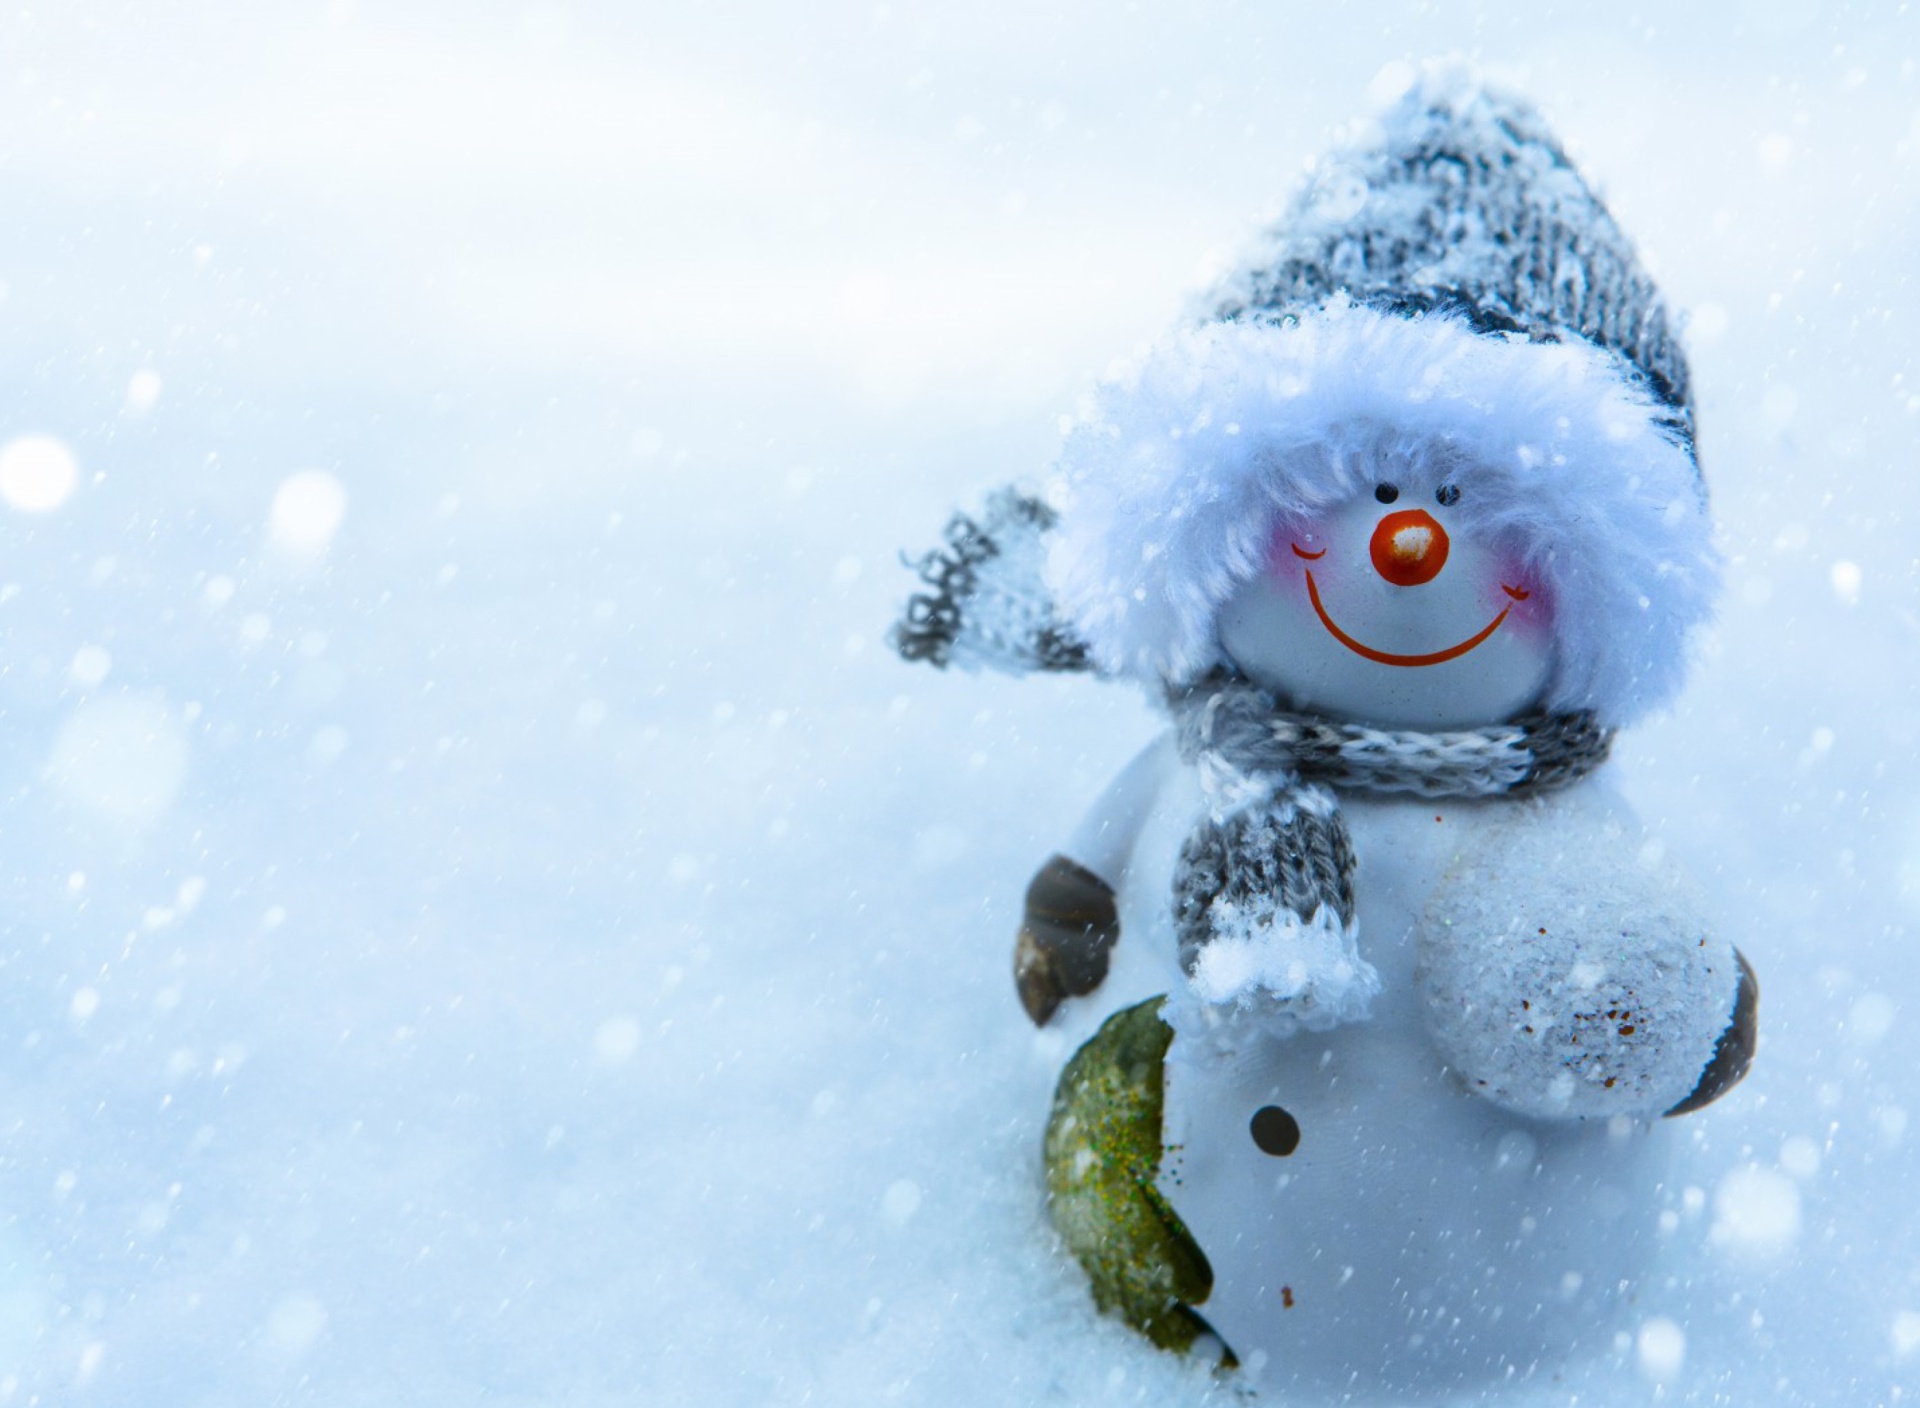 Snowman Covered With Snowflakes Wallpaper1920x1408 Wallpaper